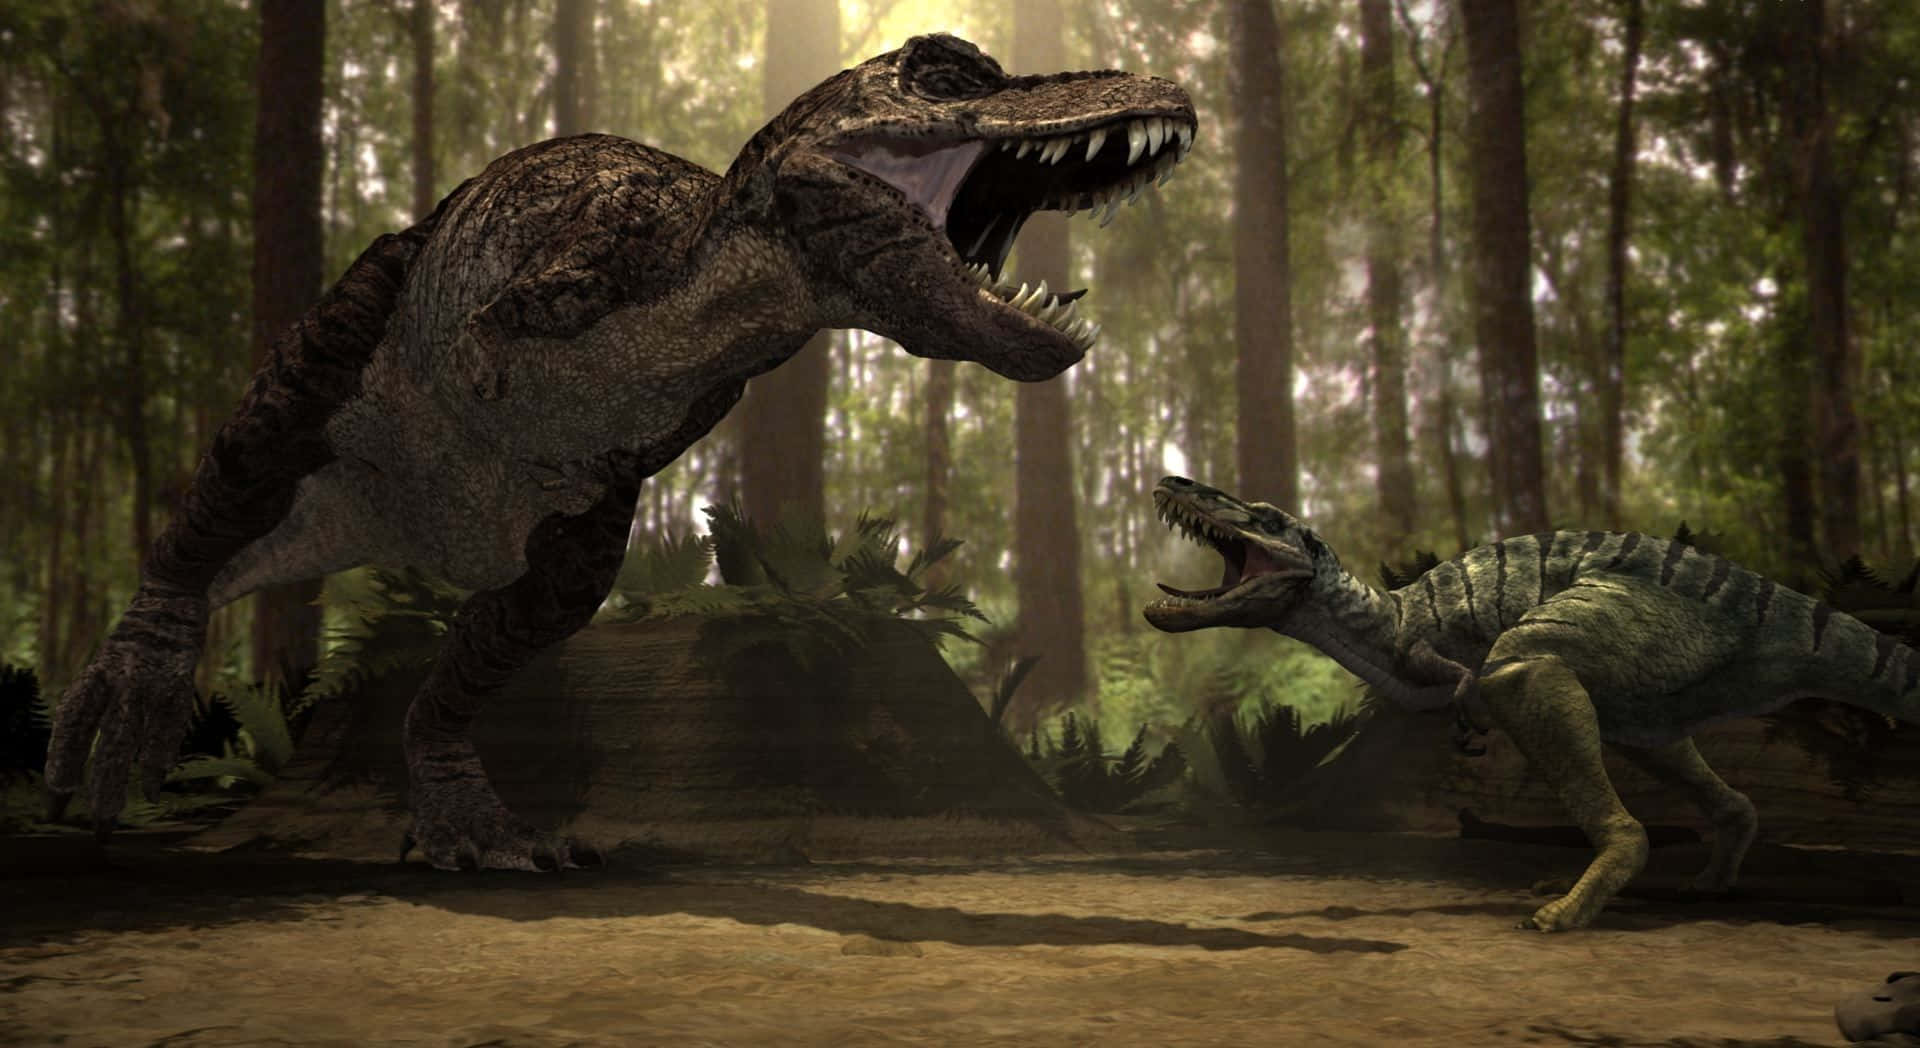 Explore the Ancient World of Dinosaurs